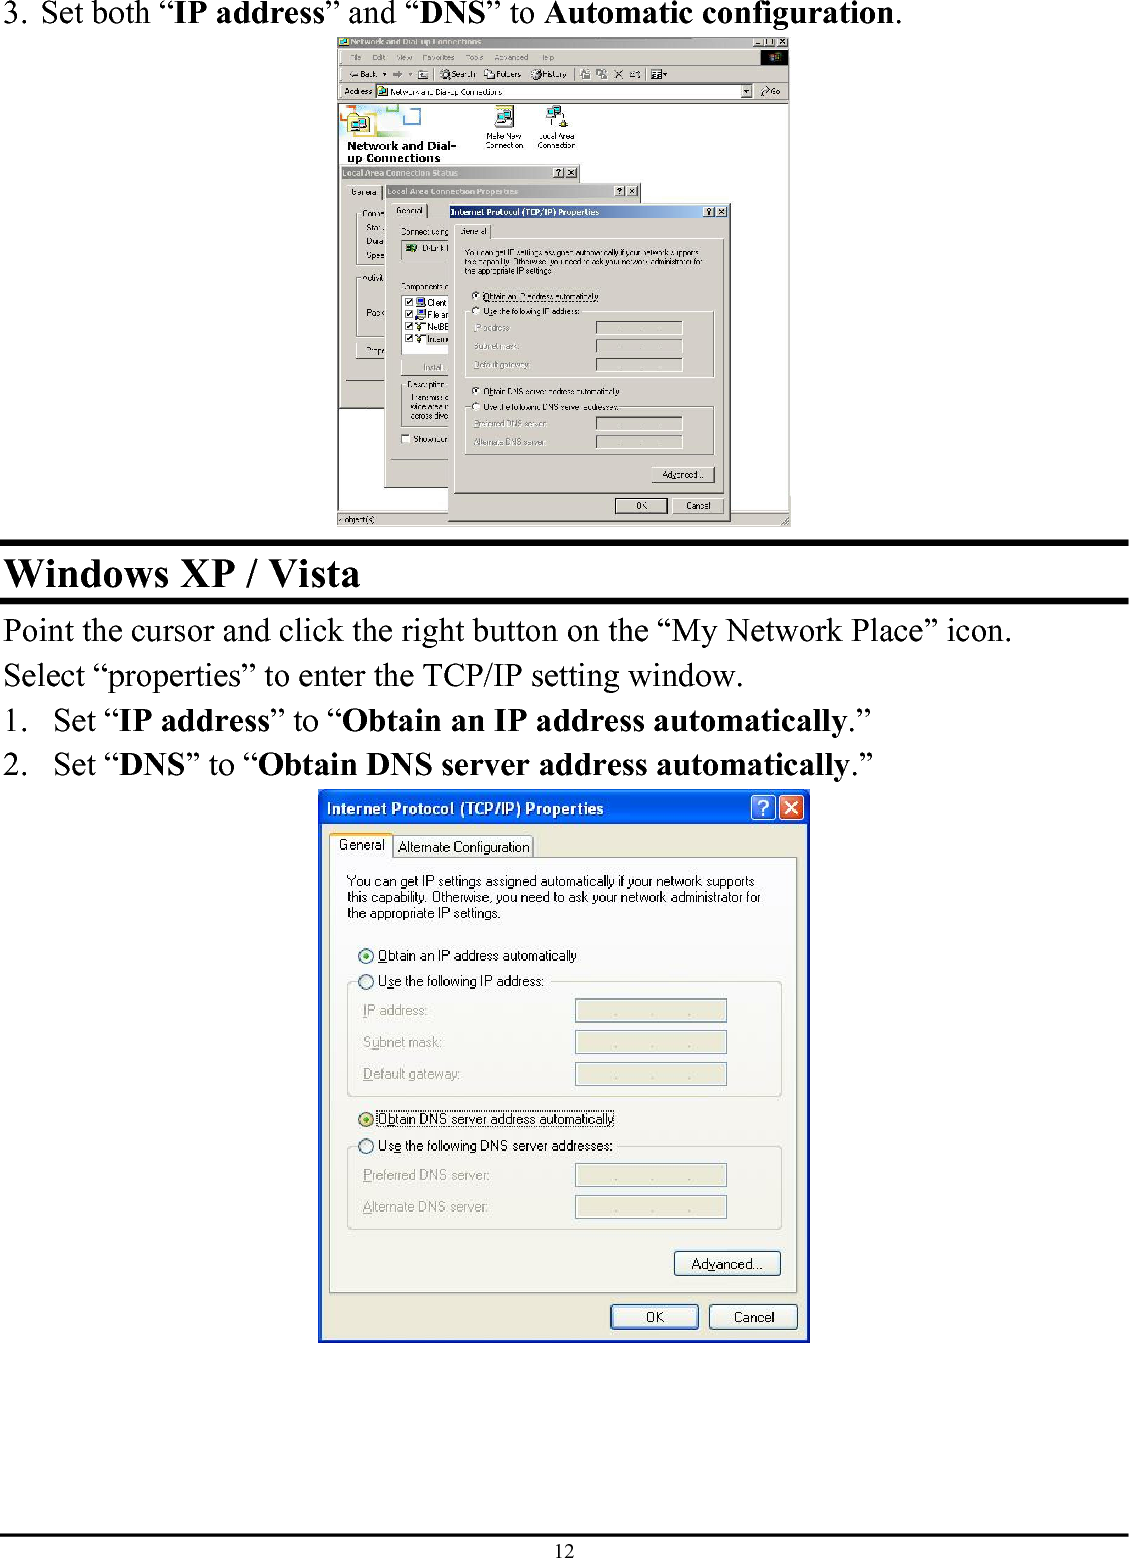 12 3. Set both “IP address” and “DNS” to Automatic configuration.  Windows XP / Vista Point the cursor and click the right button on the “My Network Place” icon. Select “properties” to enter the TCP/IP setting window. 1. Set “IP address” to “Obtain an IP address automatically.” 2. Set “DNS” to “Obtain DNS server address automatically.”  